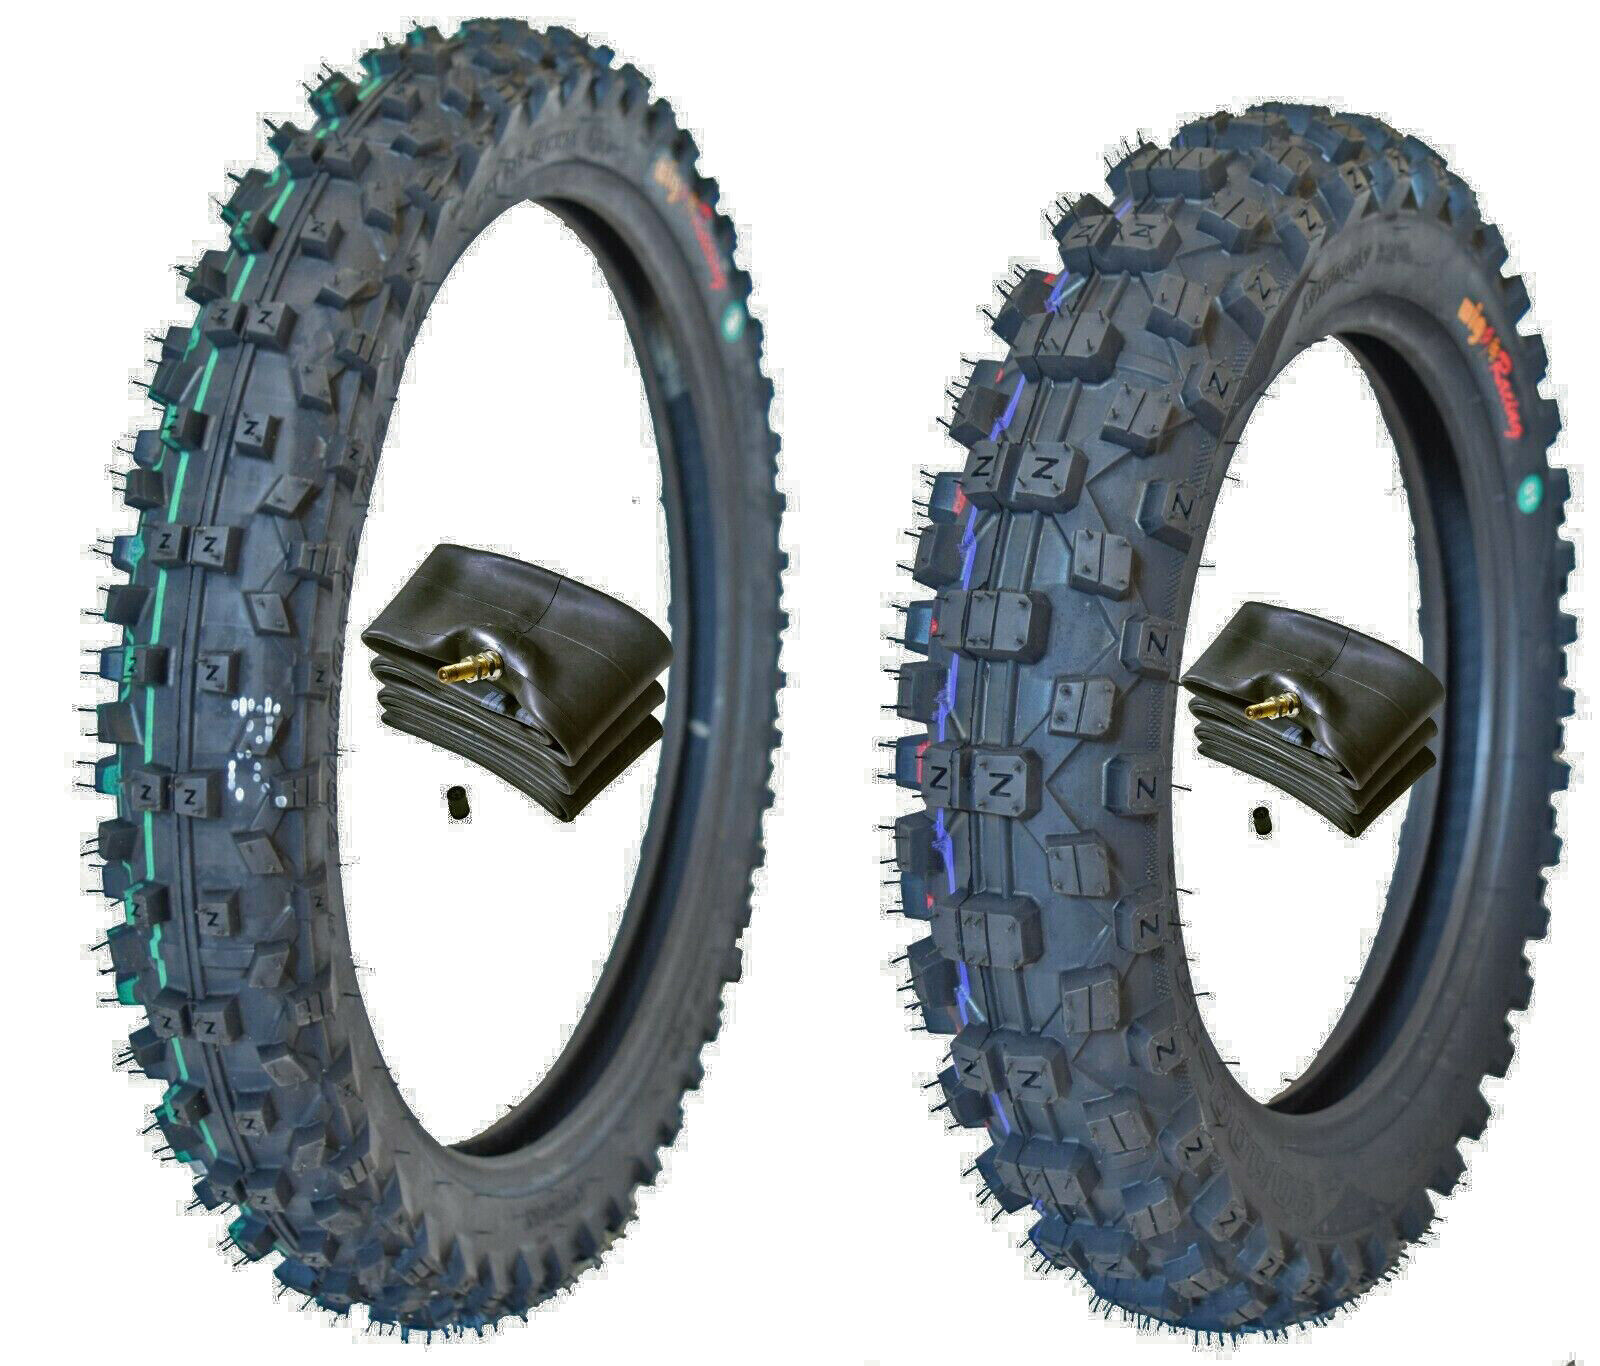 WIG Racing 80/100-12 (3.00x12) and 60/100-14 (2.5x14) Tire and Tube Combo